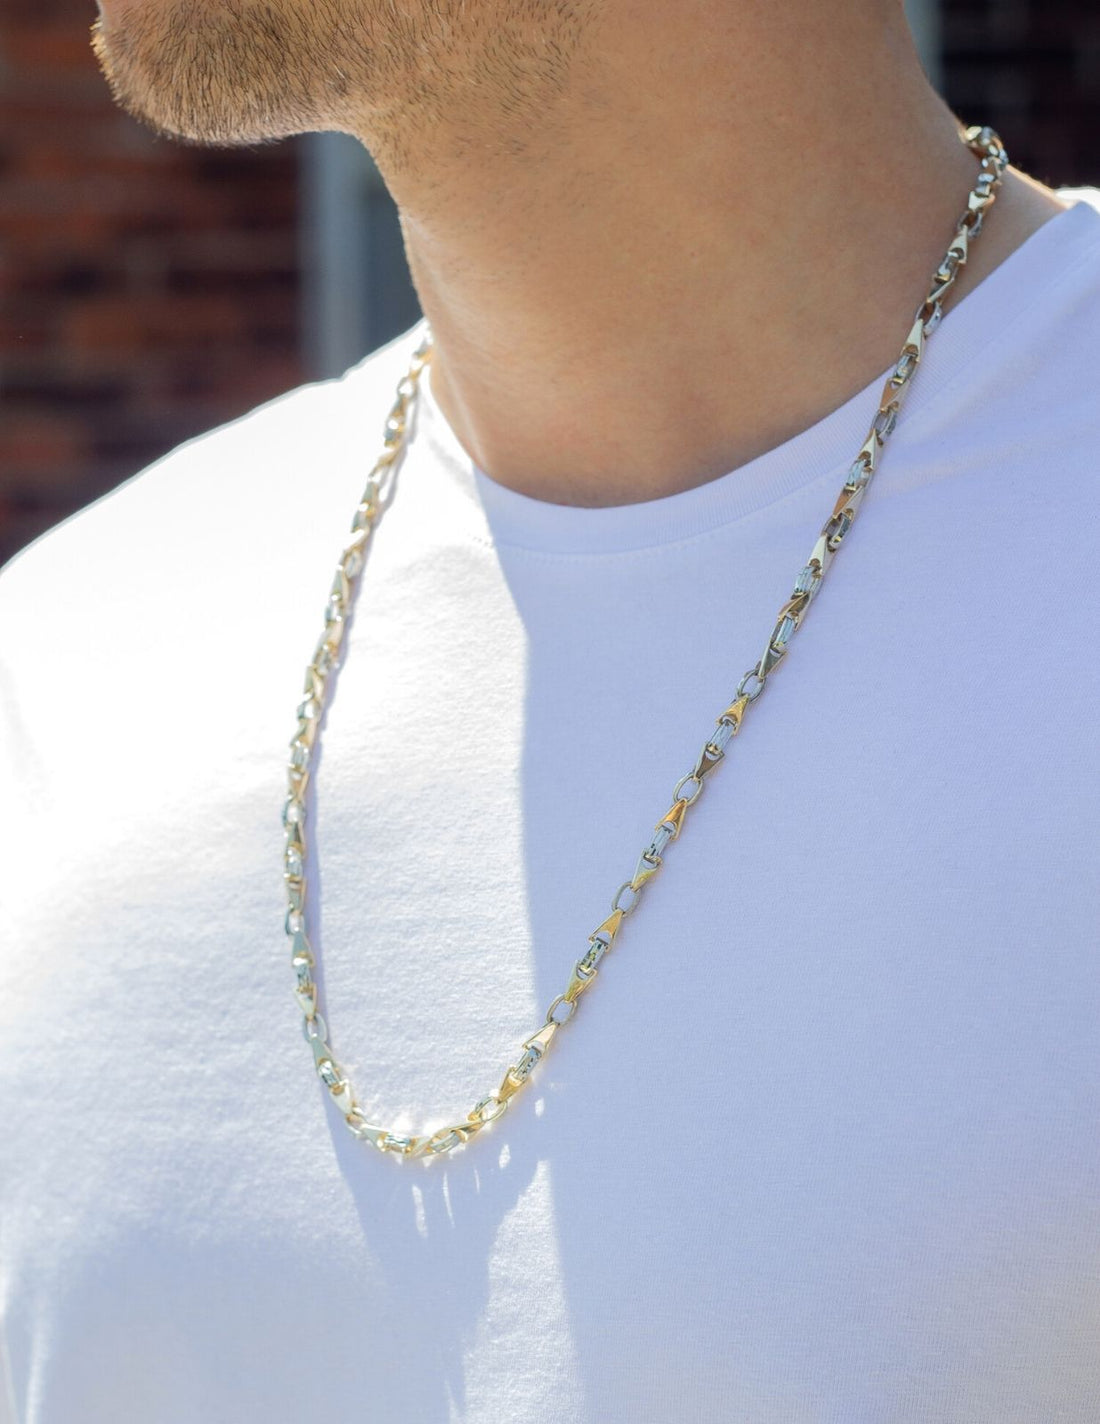 Mens gold geometric chain, solid 10k white gold fancy chain toronto, buy 10k white gold fancy chain canada, mens jewellery